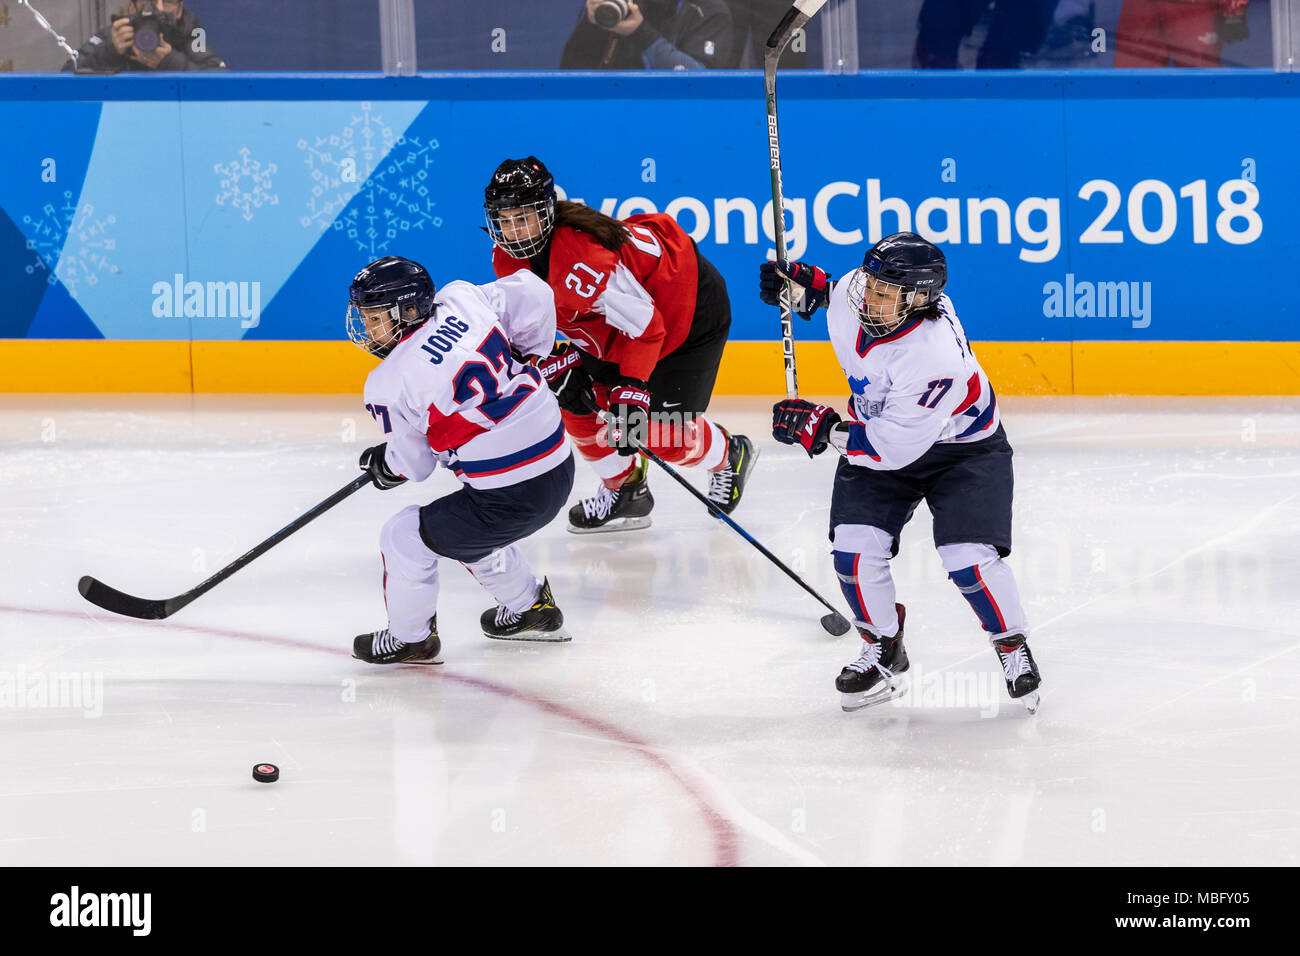 Su Hyon Jong (KOR) #27, Laura Benz (SUI) #21 and Soojin Han (KOR) #17 during Korea (combinded) vs Switzerland Women's Ice Hockey competition at the Ol Stock Photo